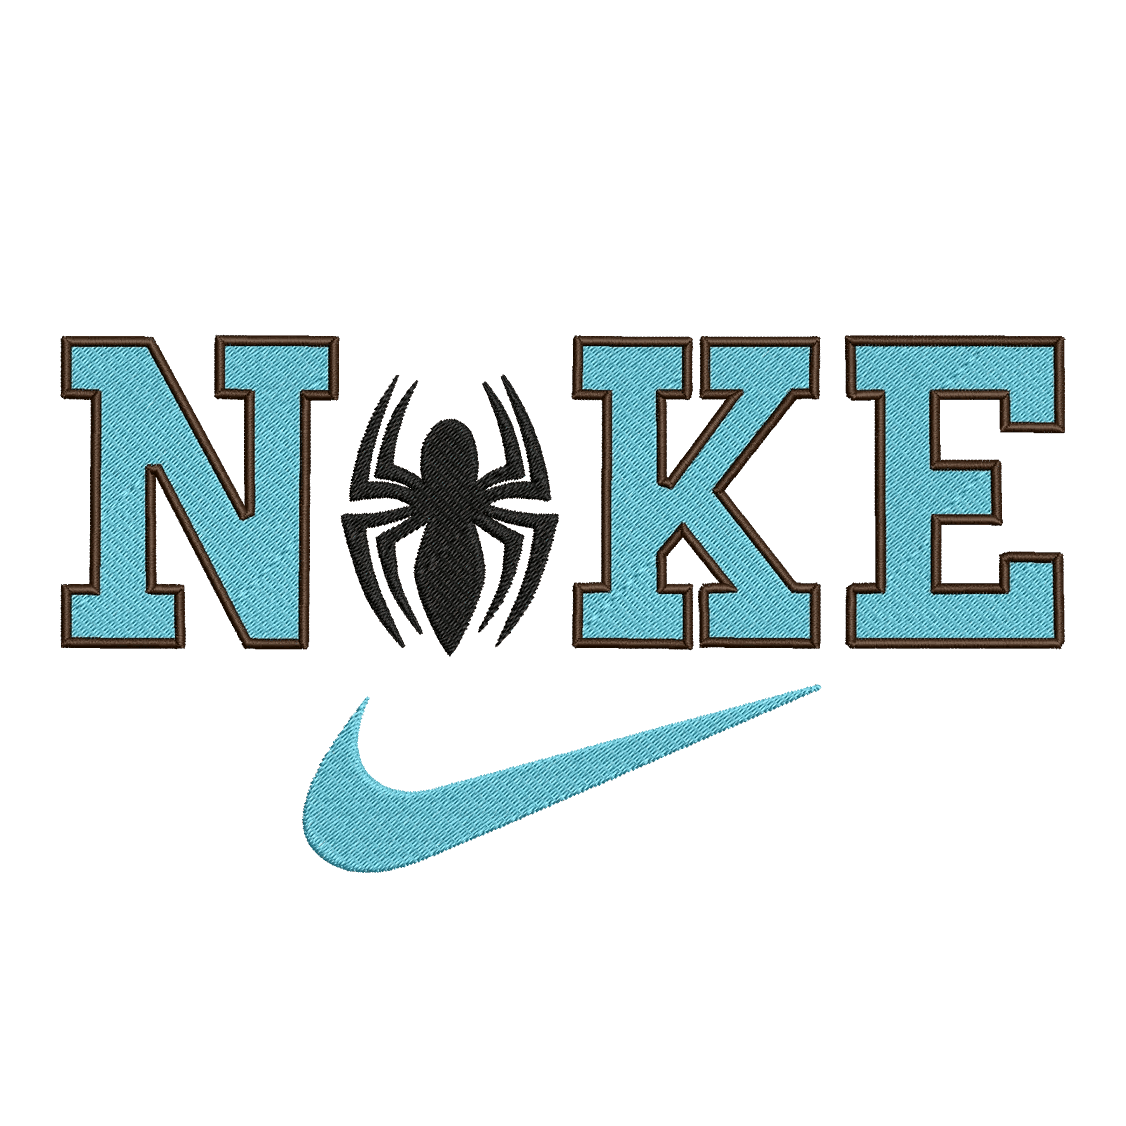 Nike and Spiderman 4 - Embroidery Design - FineryEmbroidery